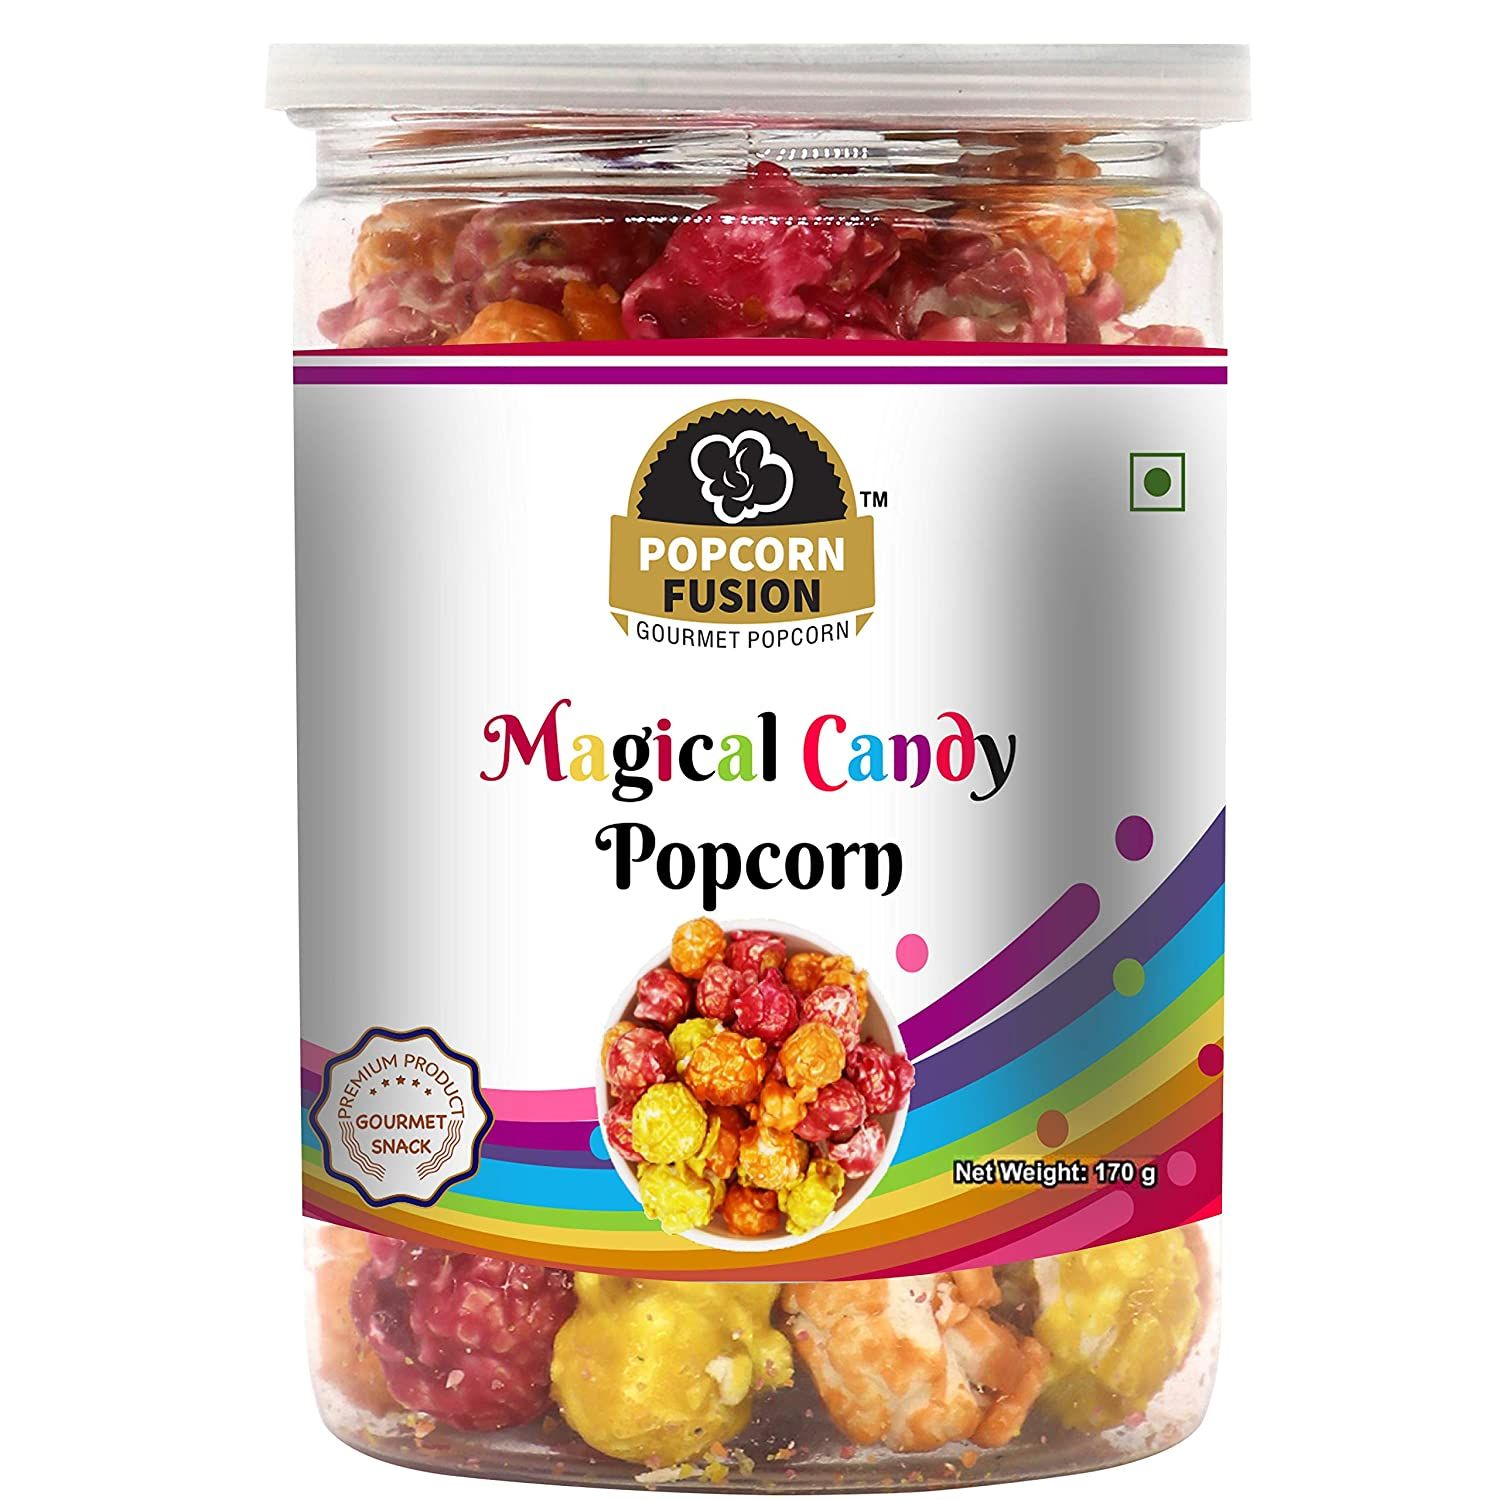 Popcorn Fusion Fruity Magical Candy Popcorn Image